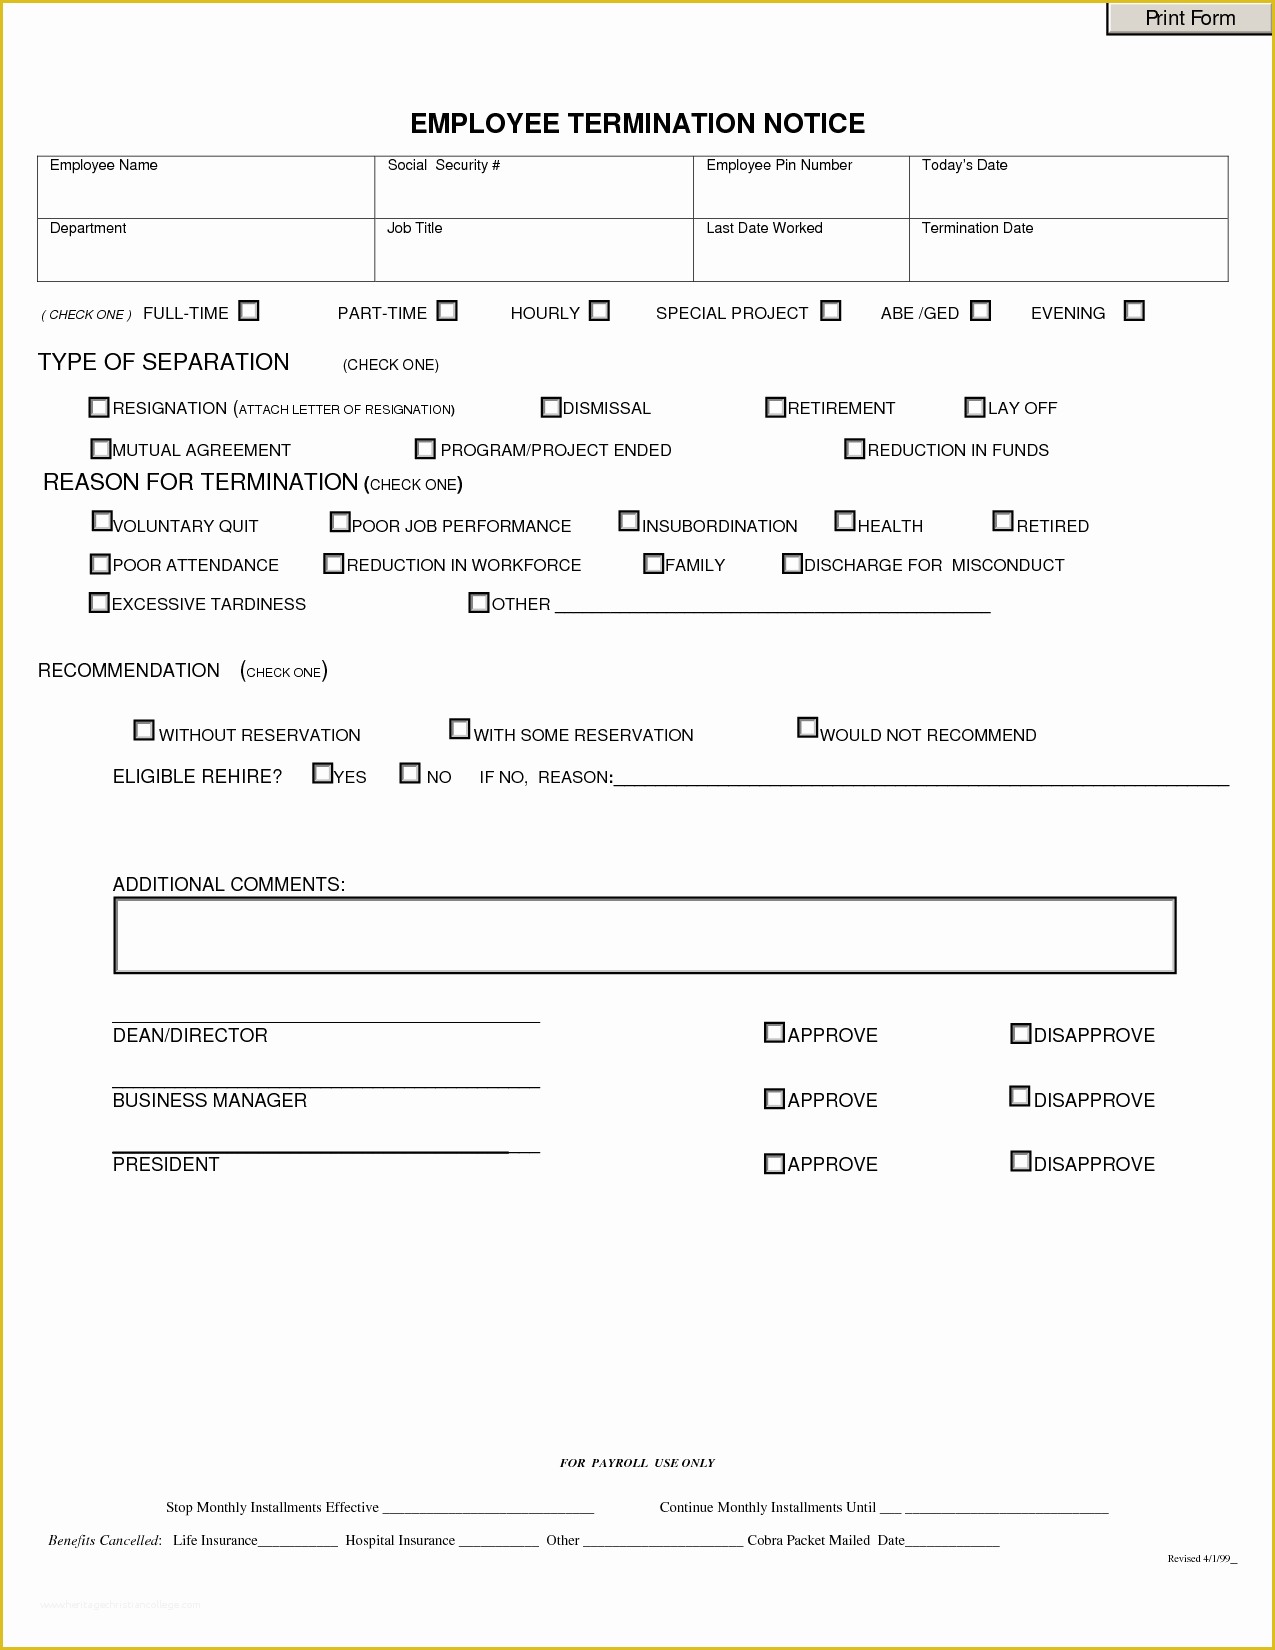 Termination form Template Free Of 9 Best Of Employee Separation Notice Template